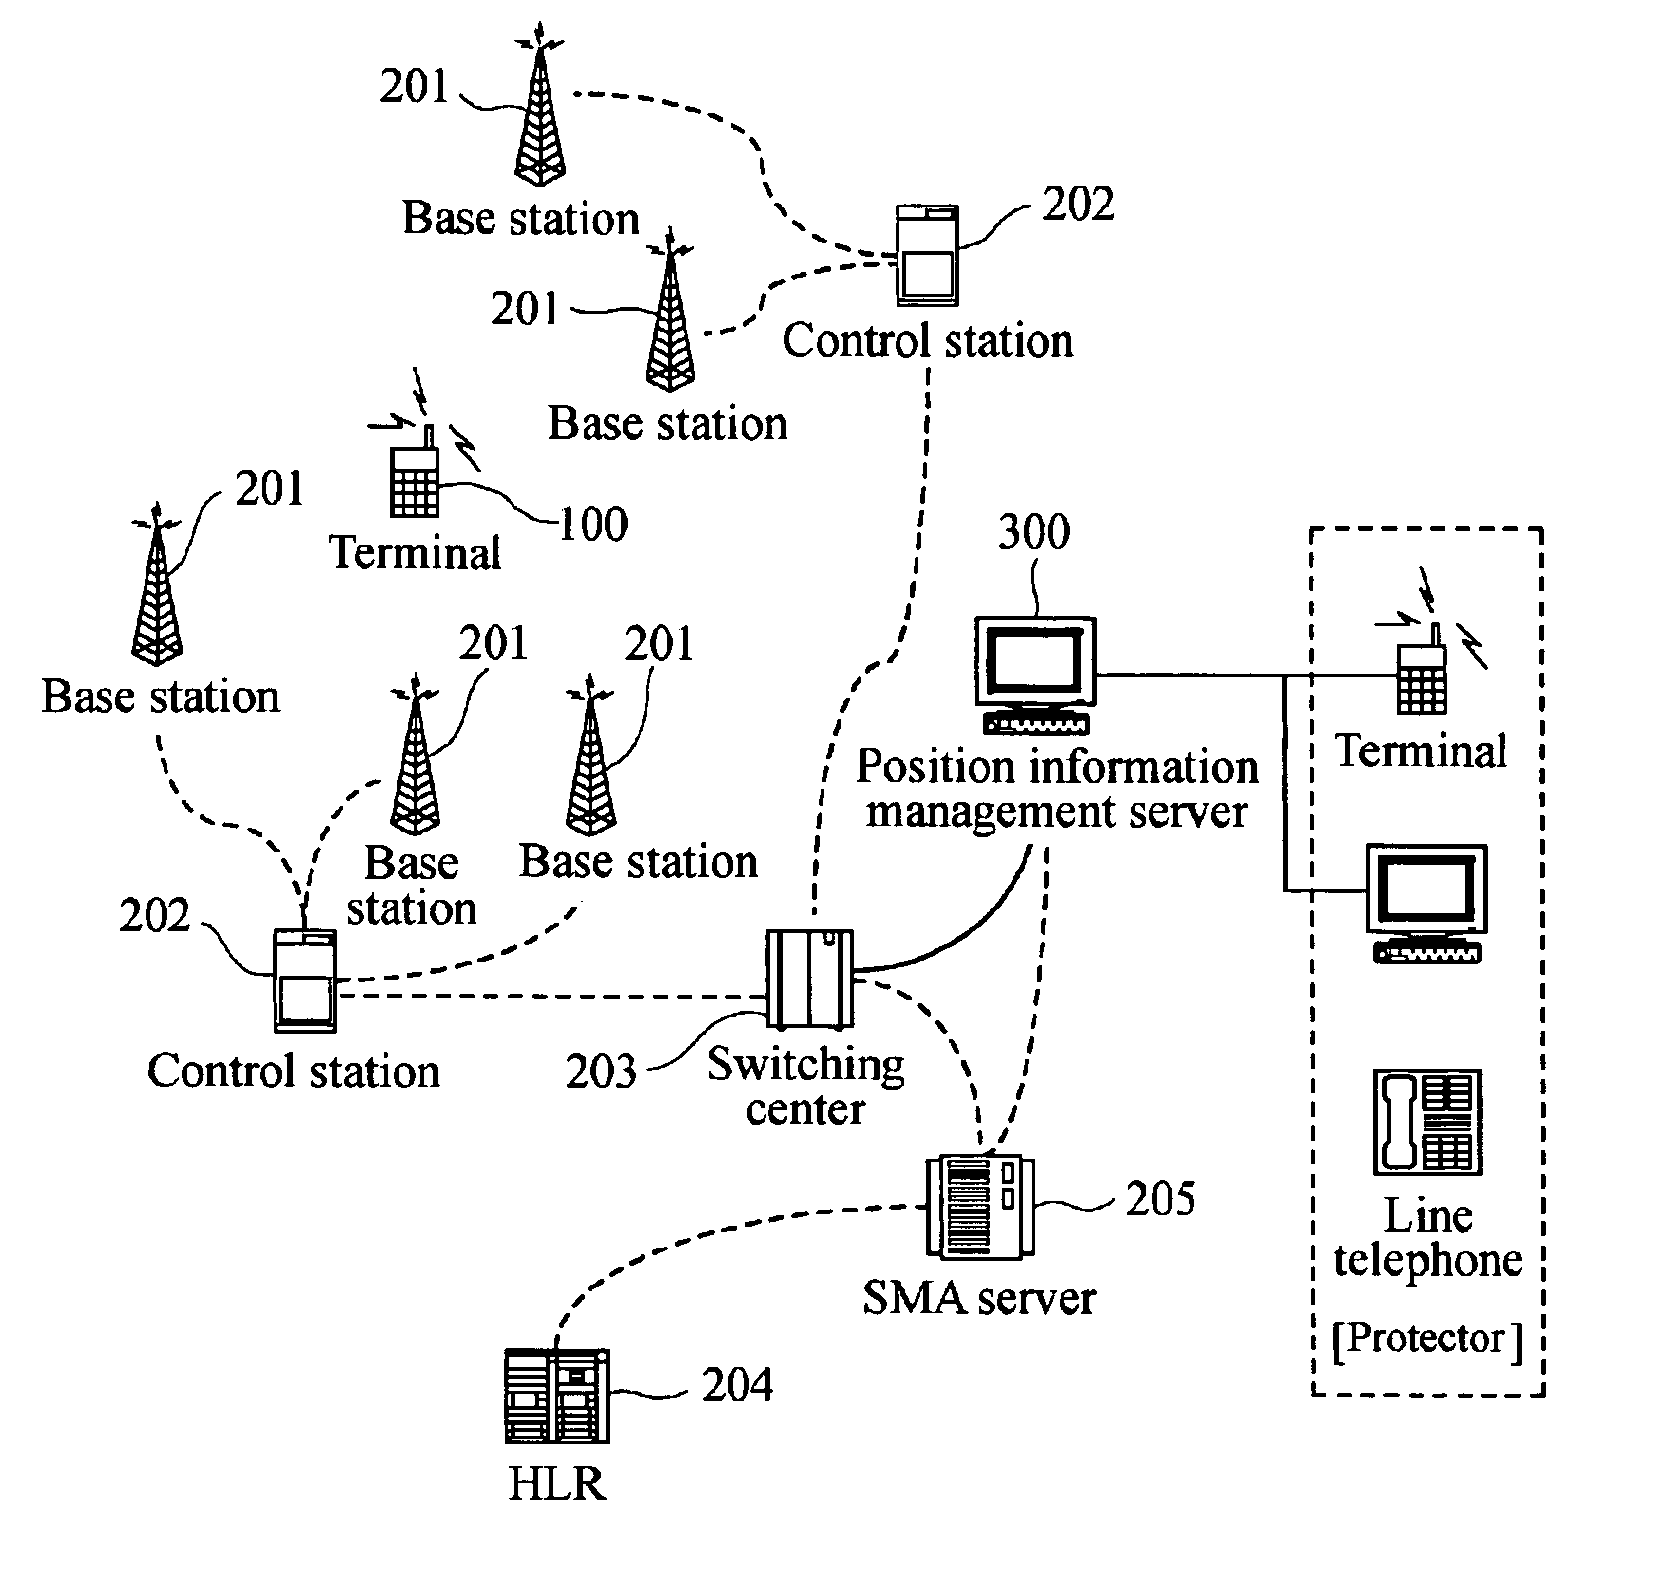 Apparatus And Method For Tracking The Position Of A Person/Object Using A Mobile Communication Network